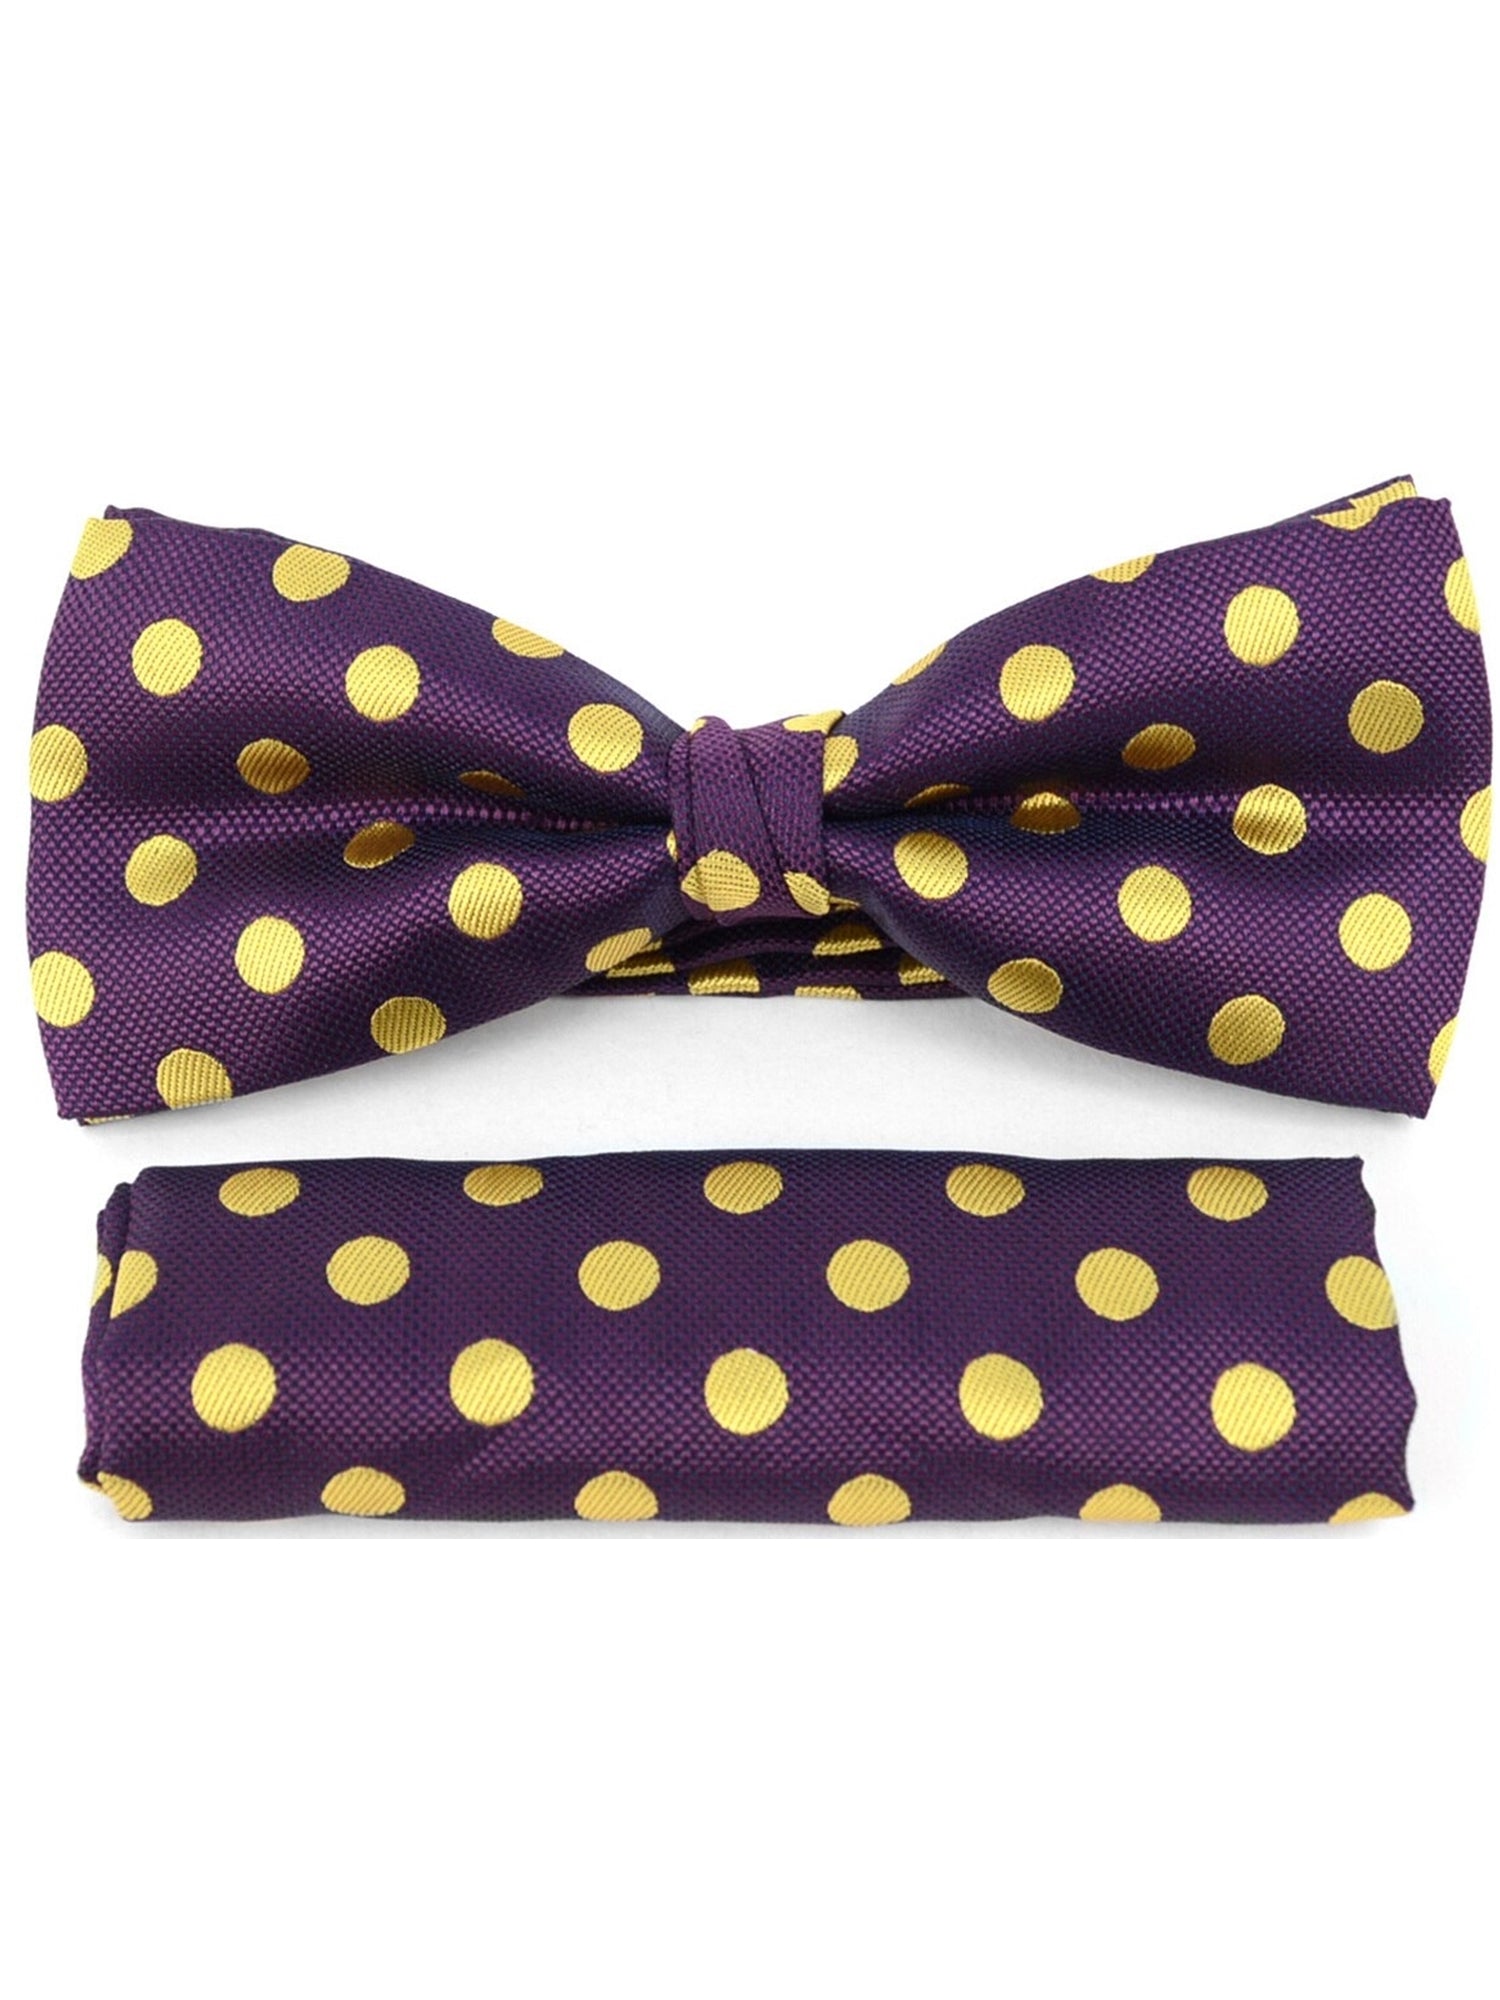 Men's Black And Gold Polka Dots Pre-tied Adjustable Length Bow Tie & Hanky Set Men's Solid Color Bow Tie TheDapperTie Purple & Yellow One Size 